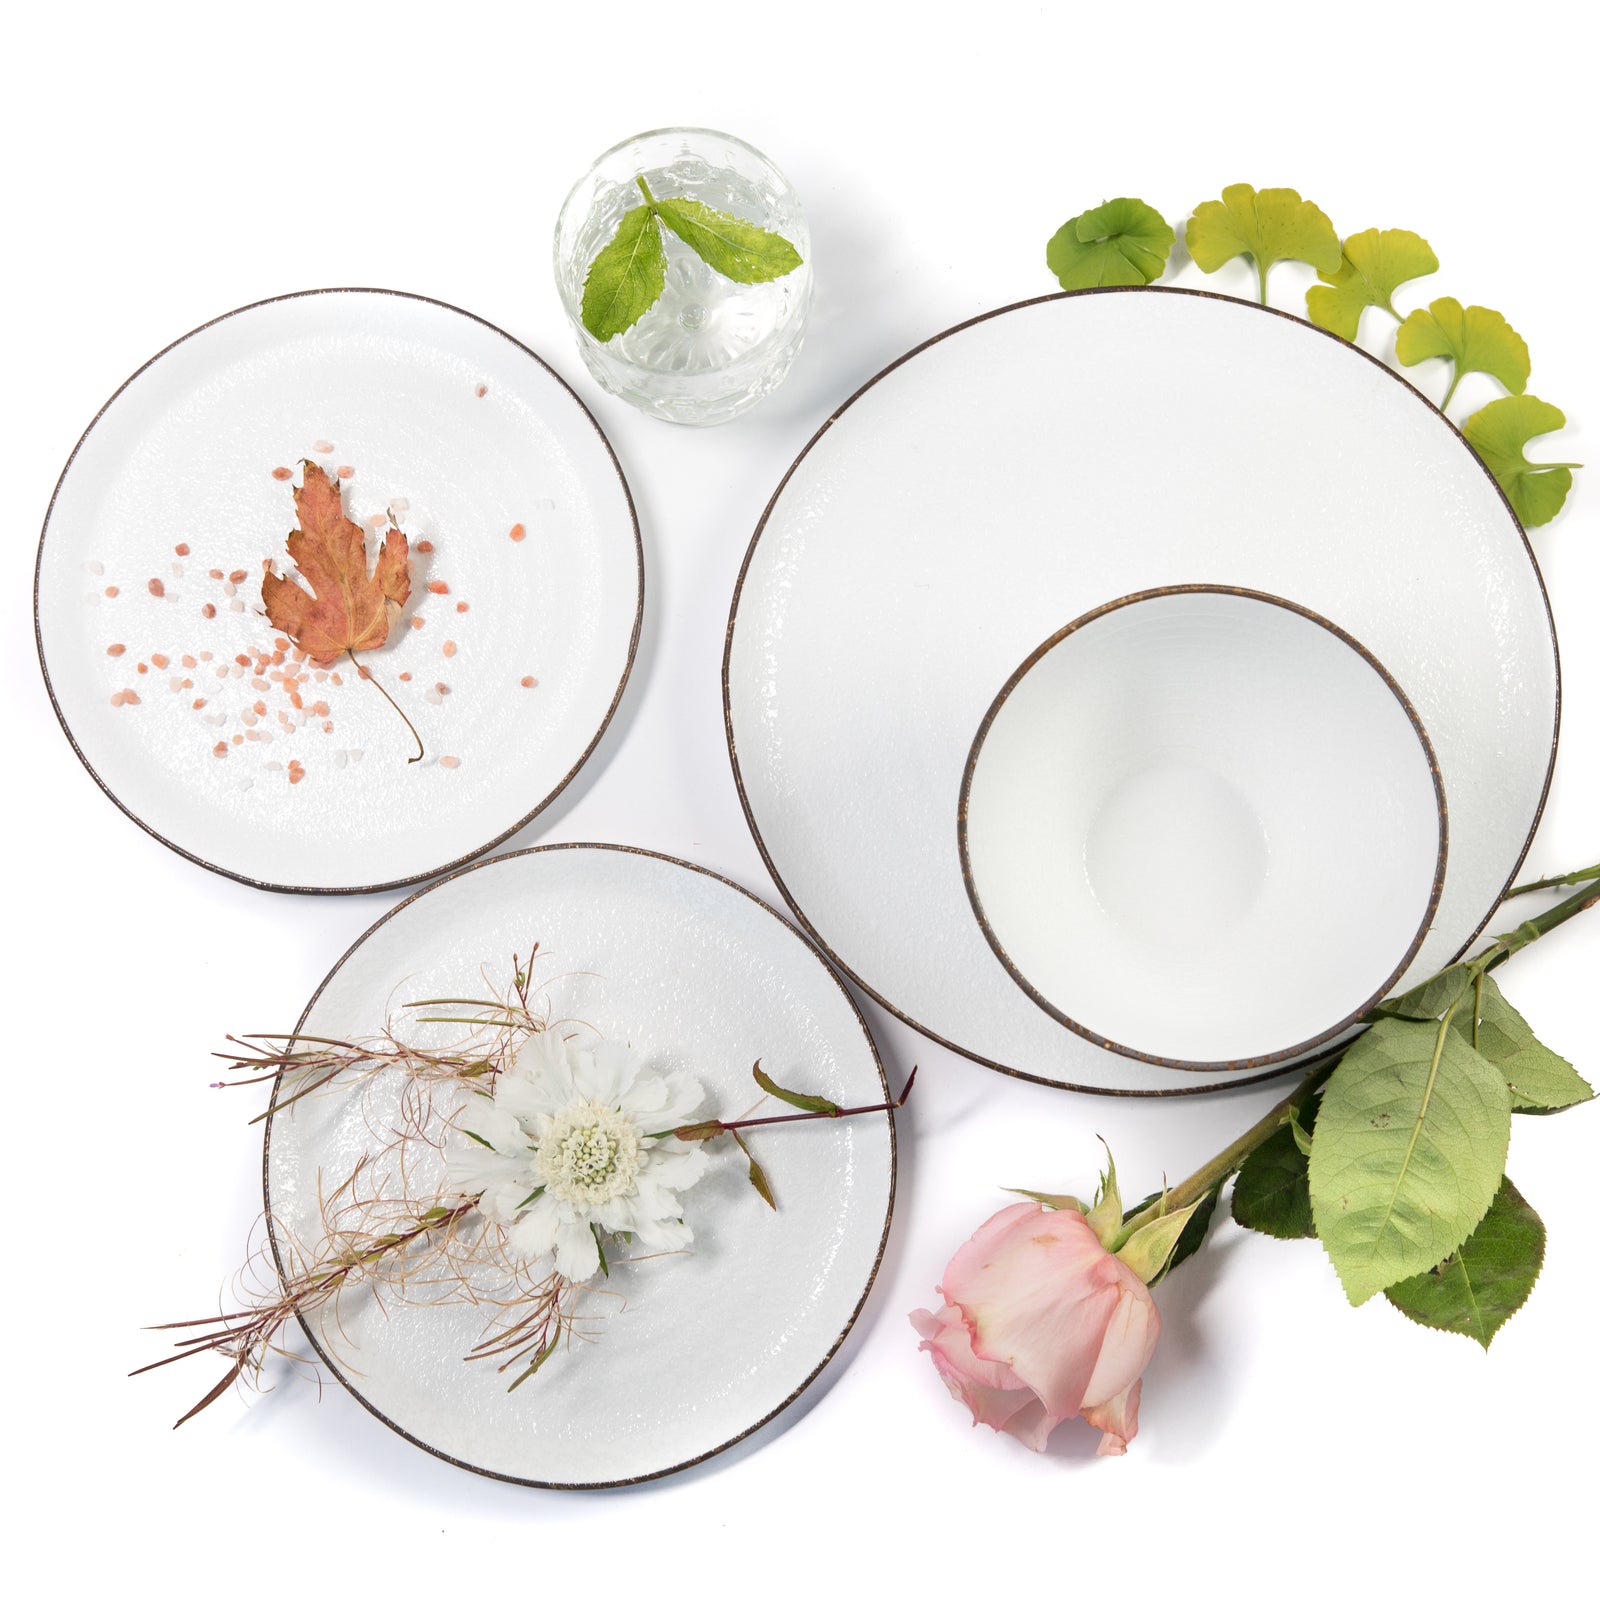 Simple White Dinnerware Collection